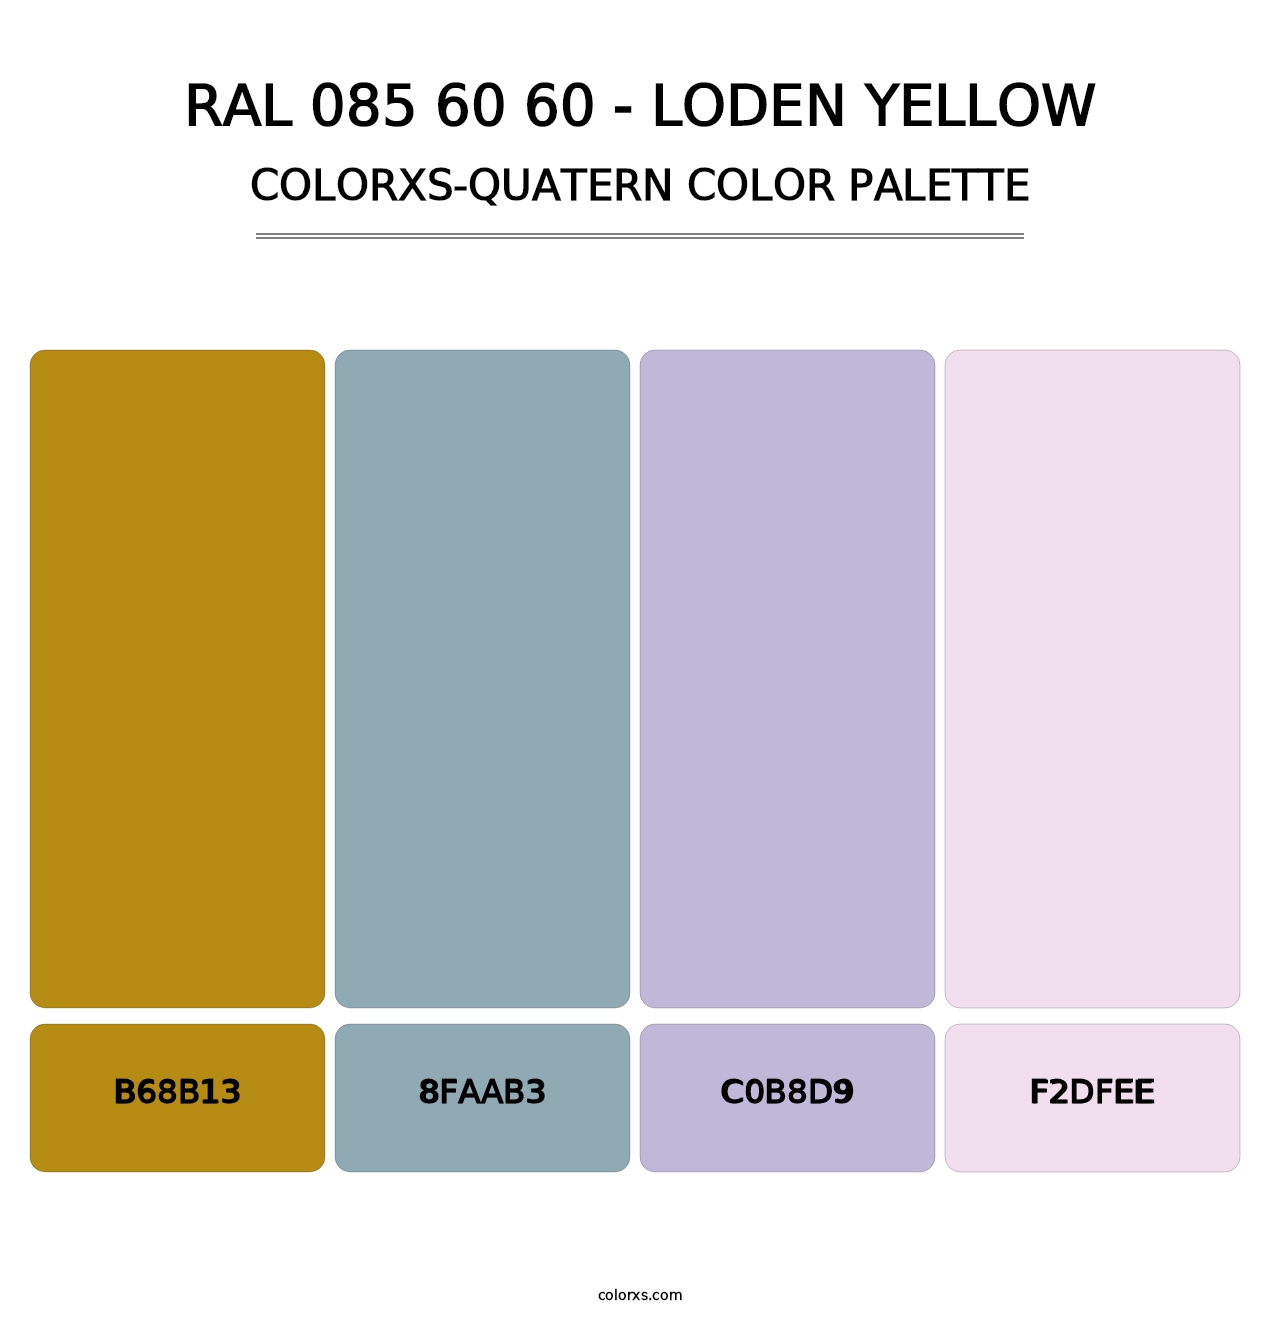 RAL 085 60 60 - Loden Yellow - Colorxs Quatern Palette